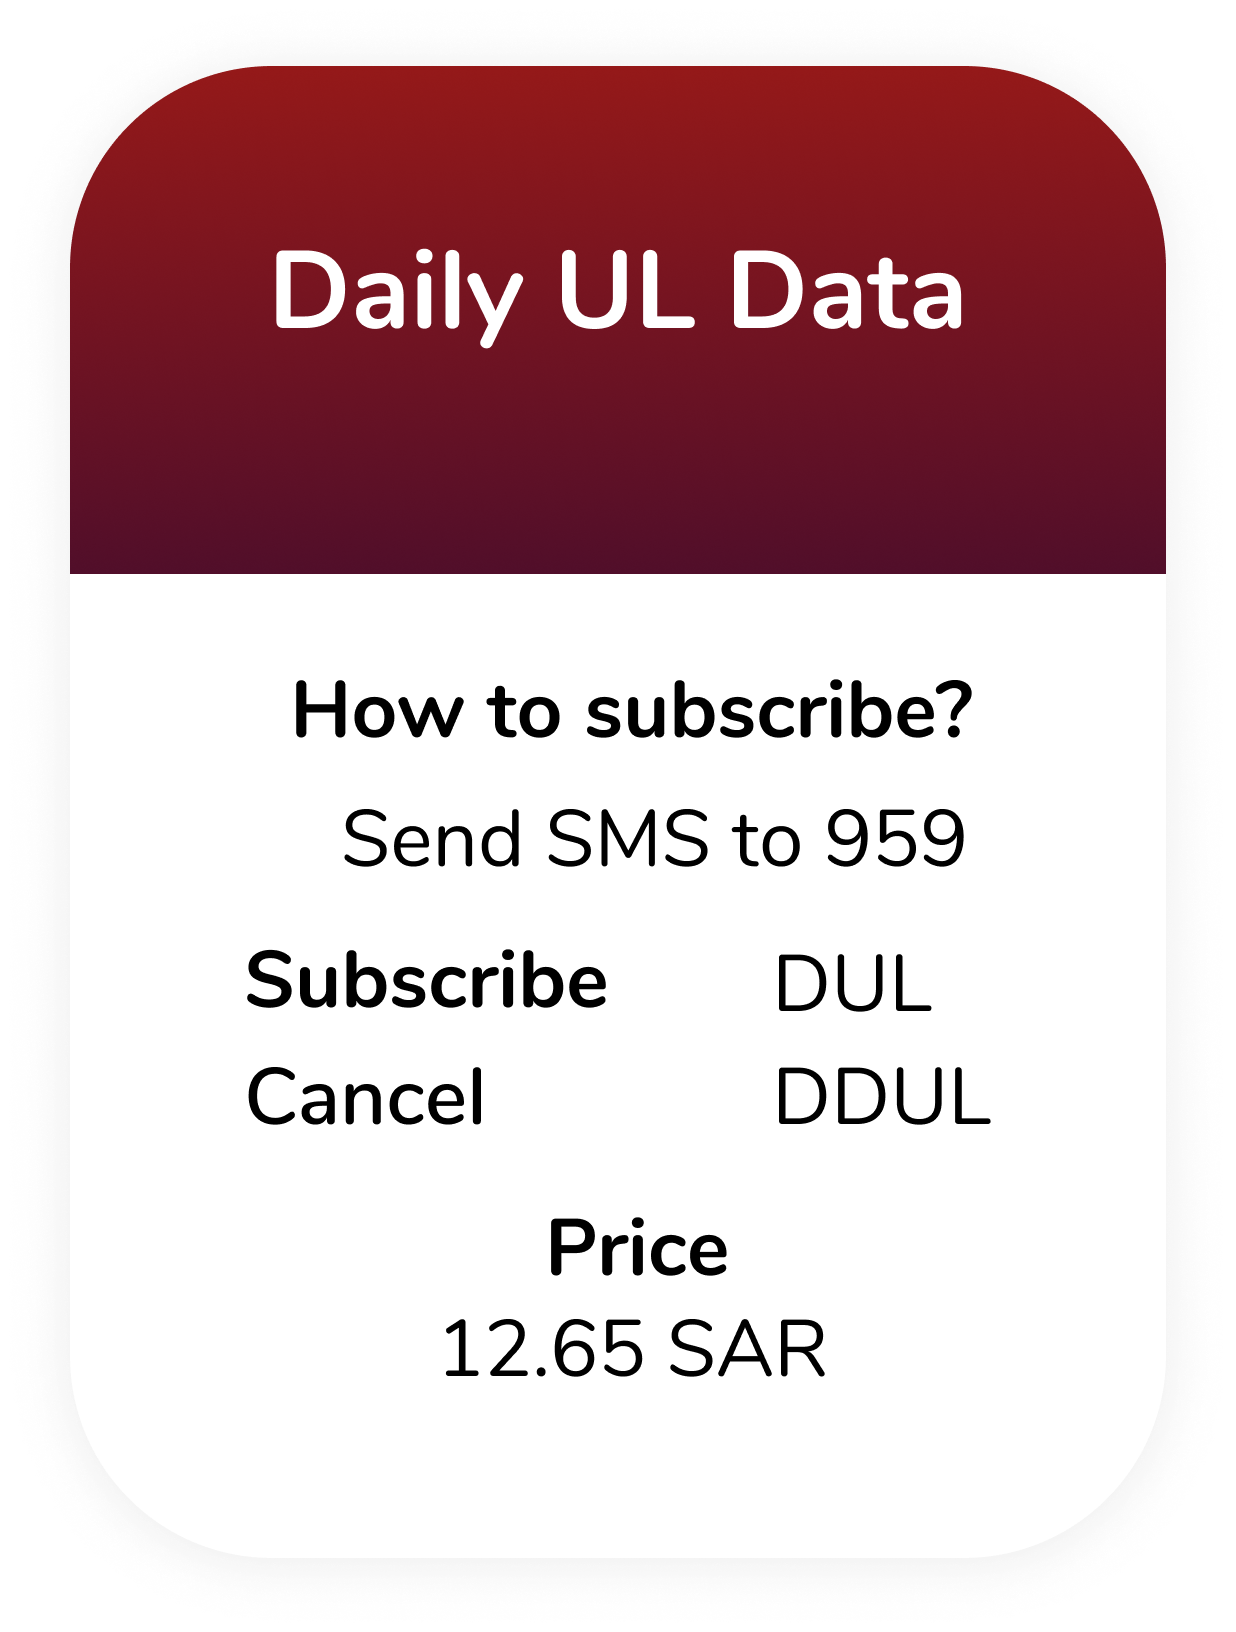 daily unlimited local calls and data bundle